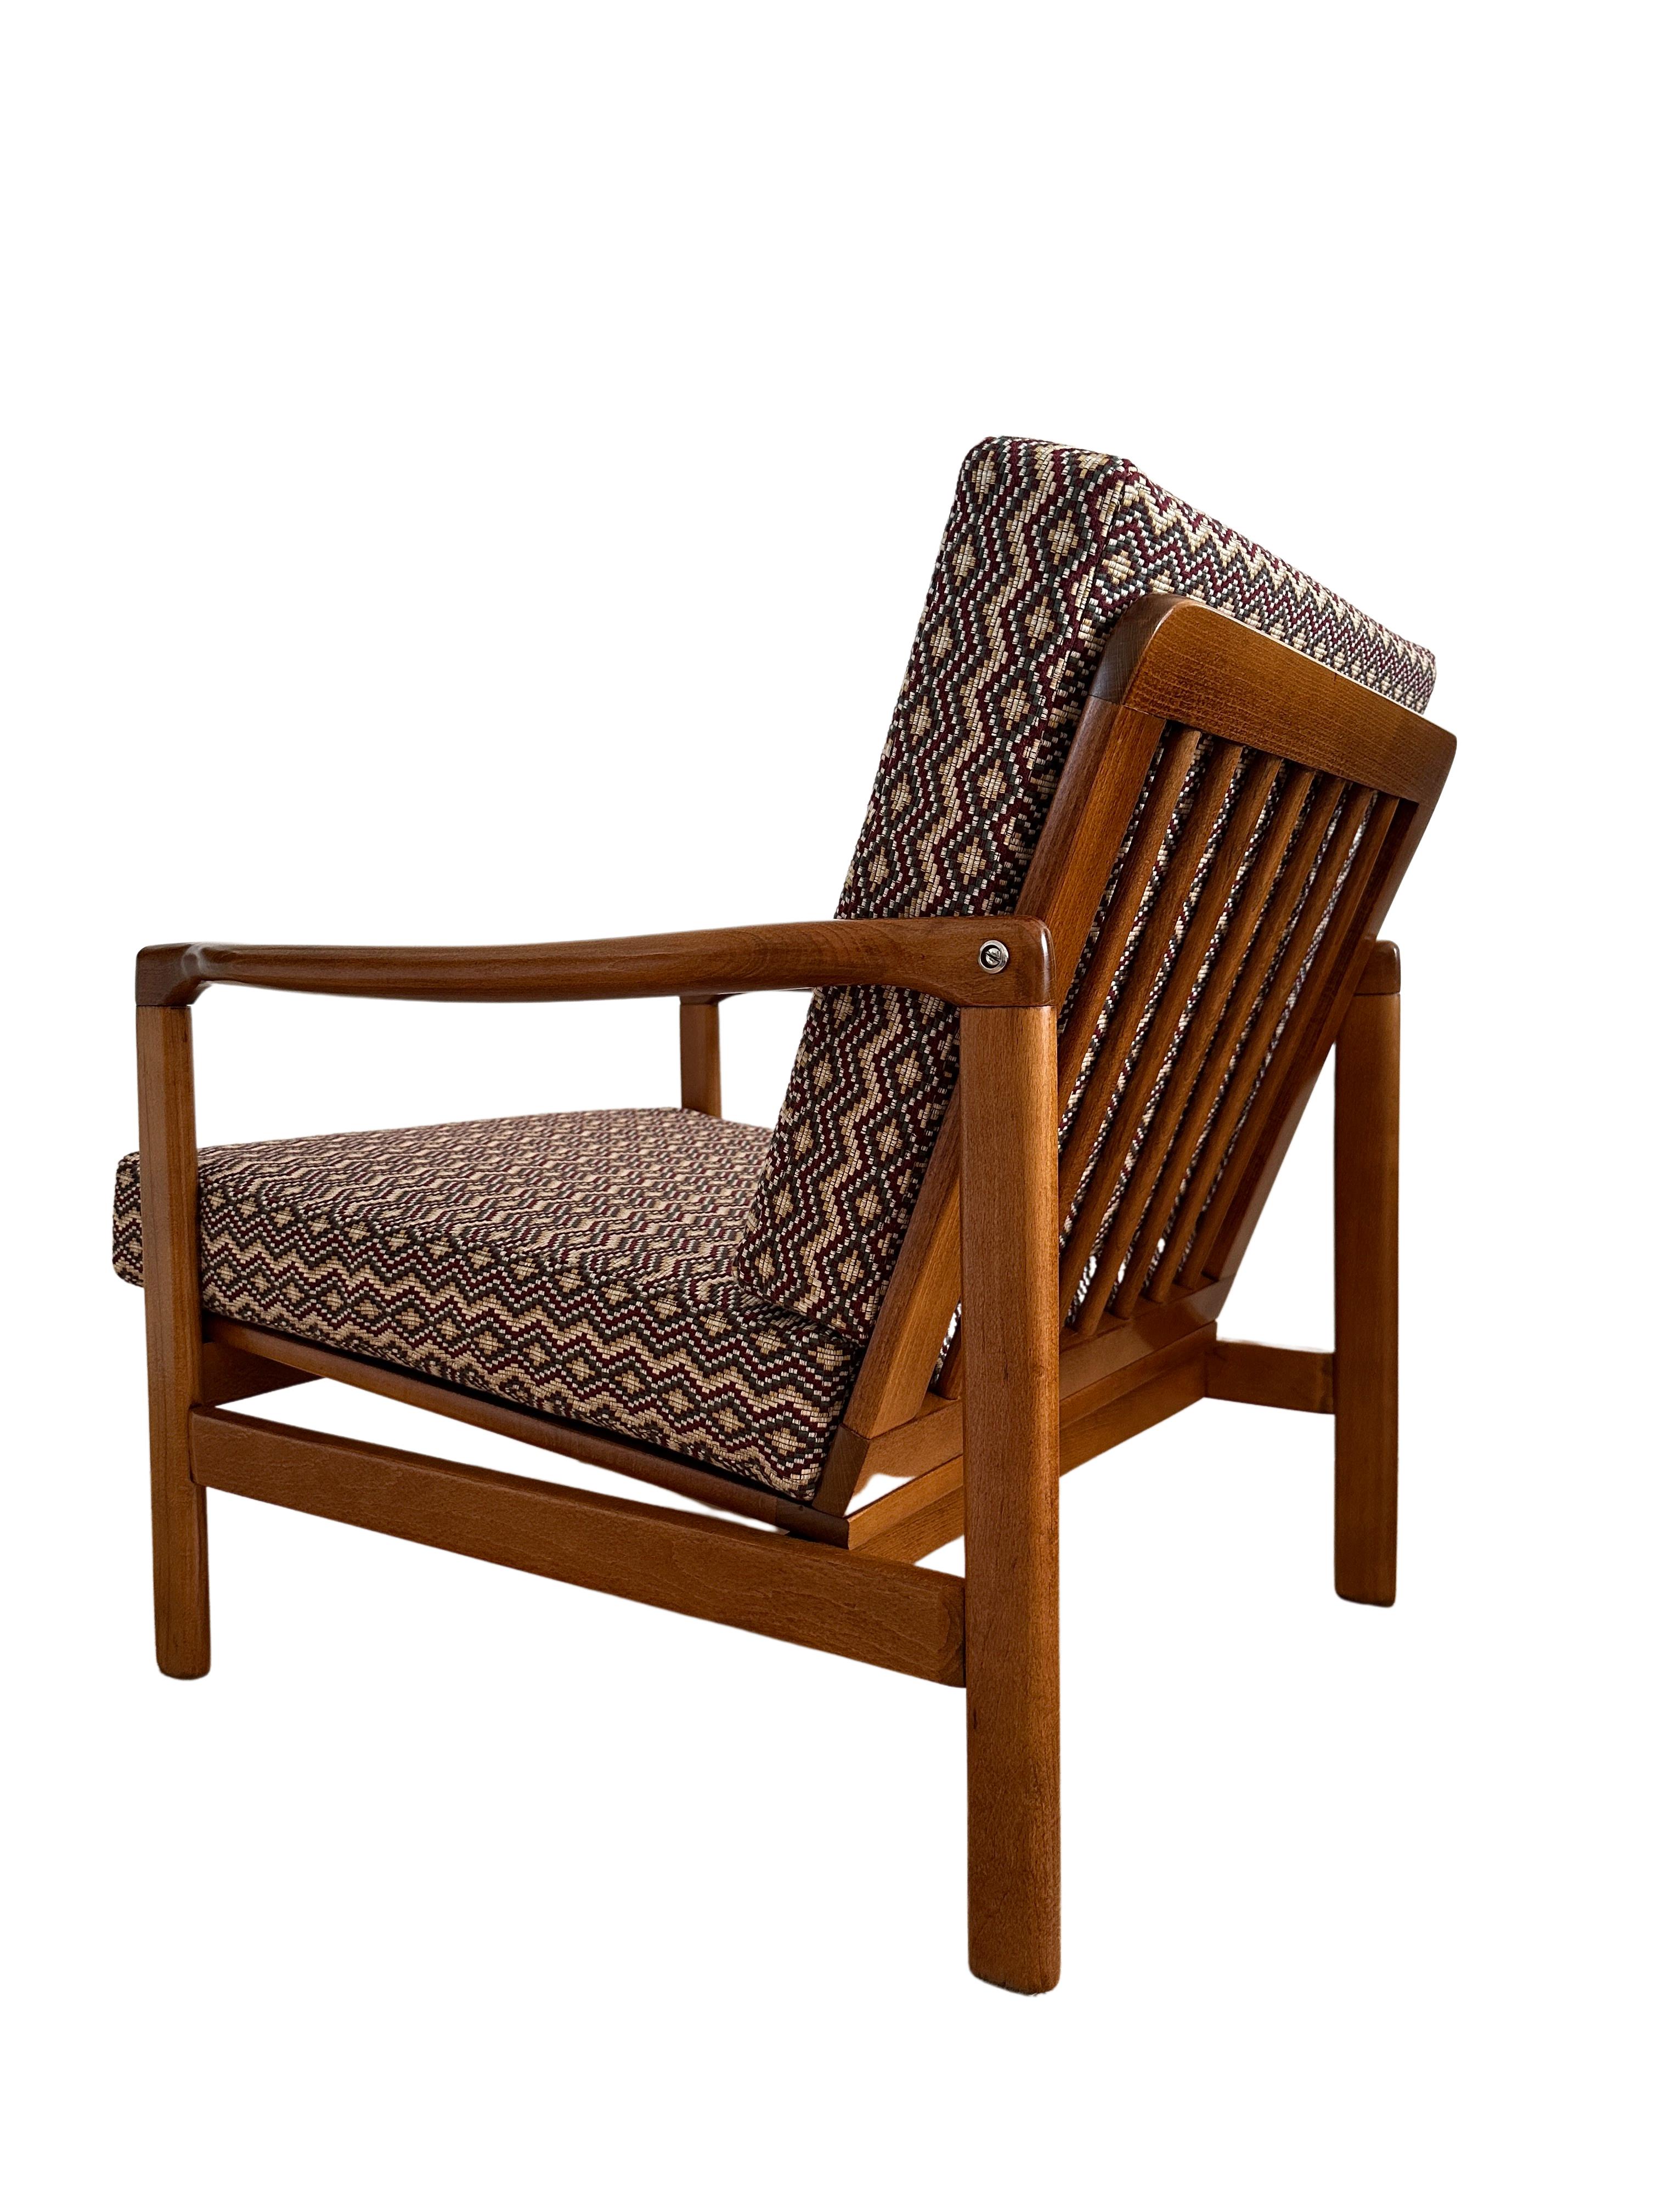 Hand-Crafted Midcentury Armchair, in Geometric and Ethnic Fabric, Europe, 1960s For Sale